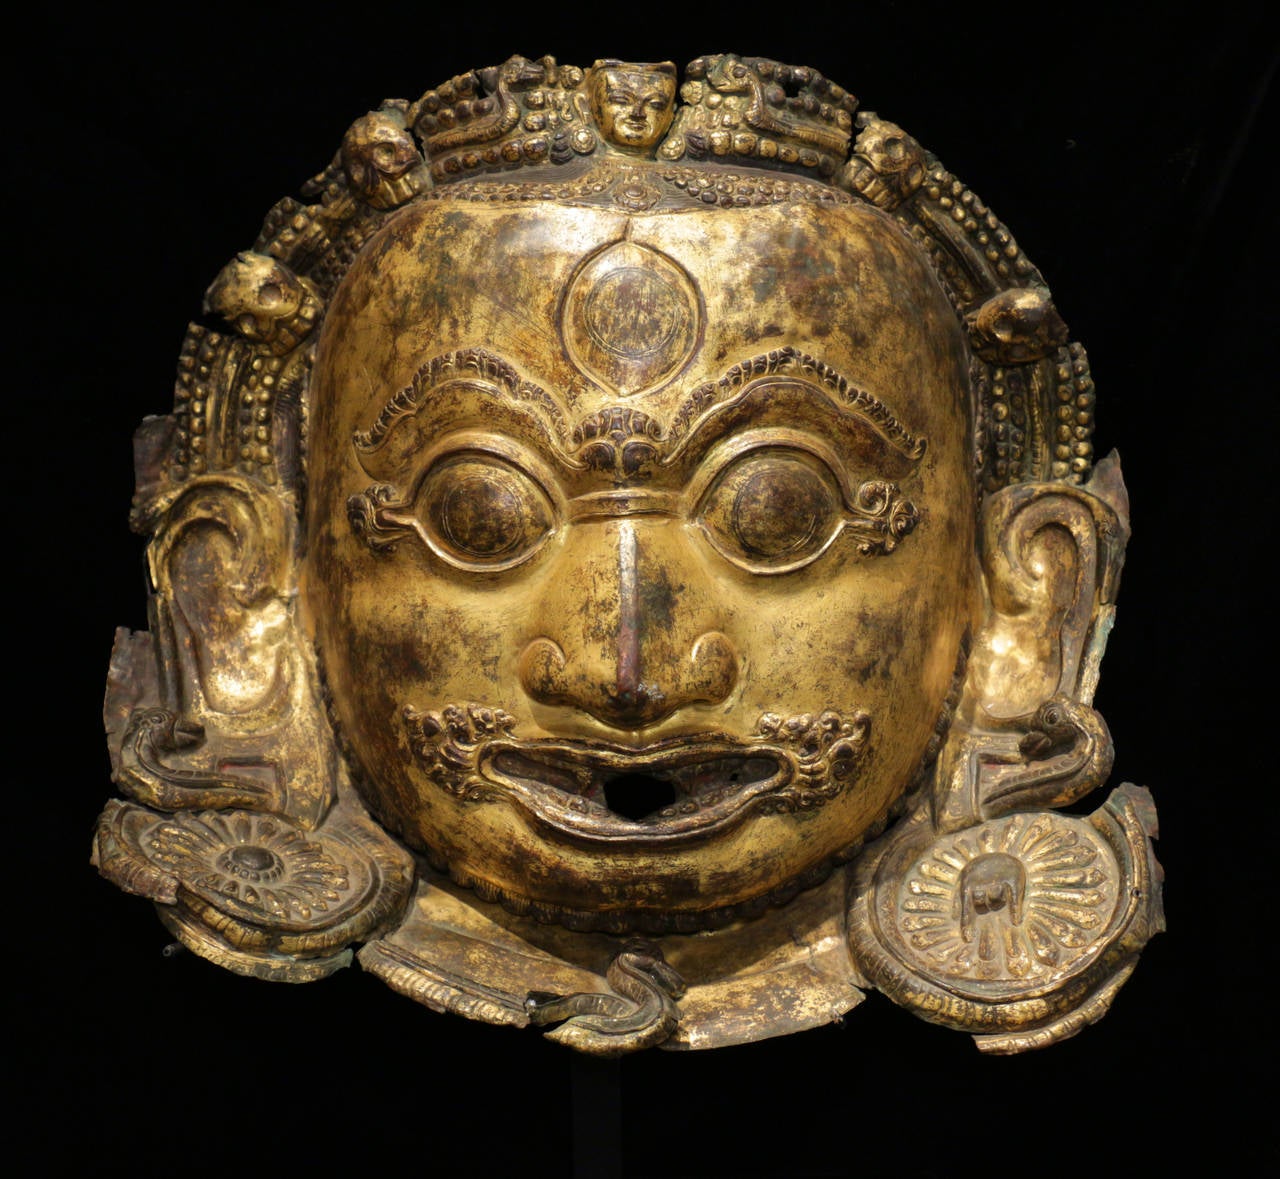 15th Century Bhairava Mask from Nepal. Gold gilt on repousse copper. Bhairava is one of the main protector deities of the Kathmandu valley. On the auspicious day, once a year, local rice beer would be offered to worshipers who would drink it as it